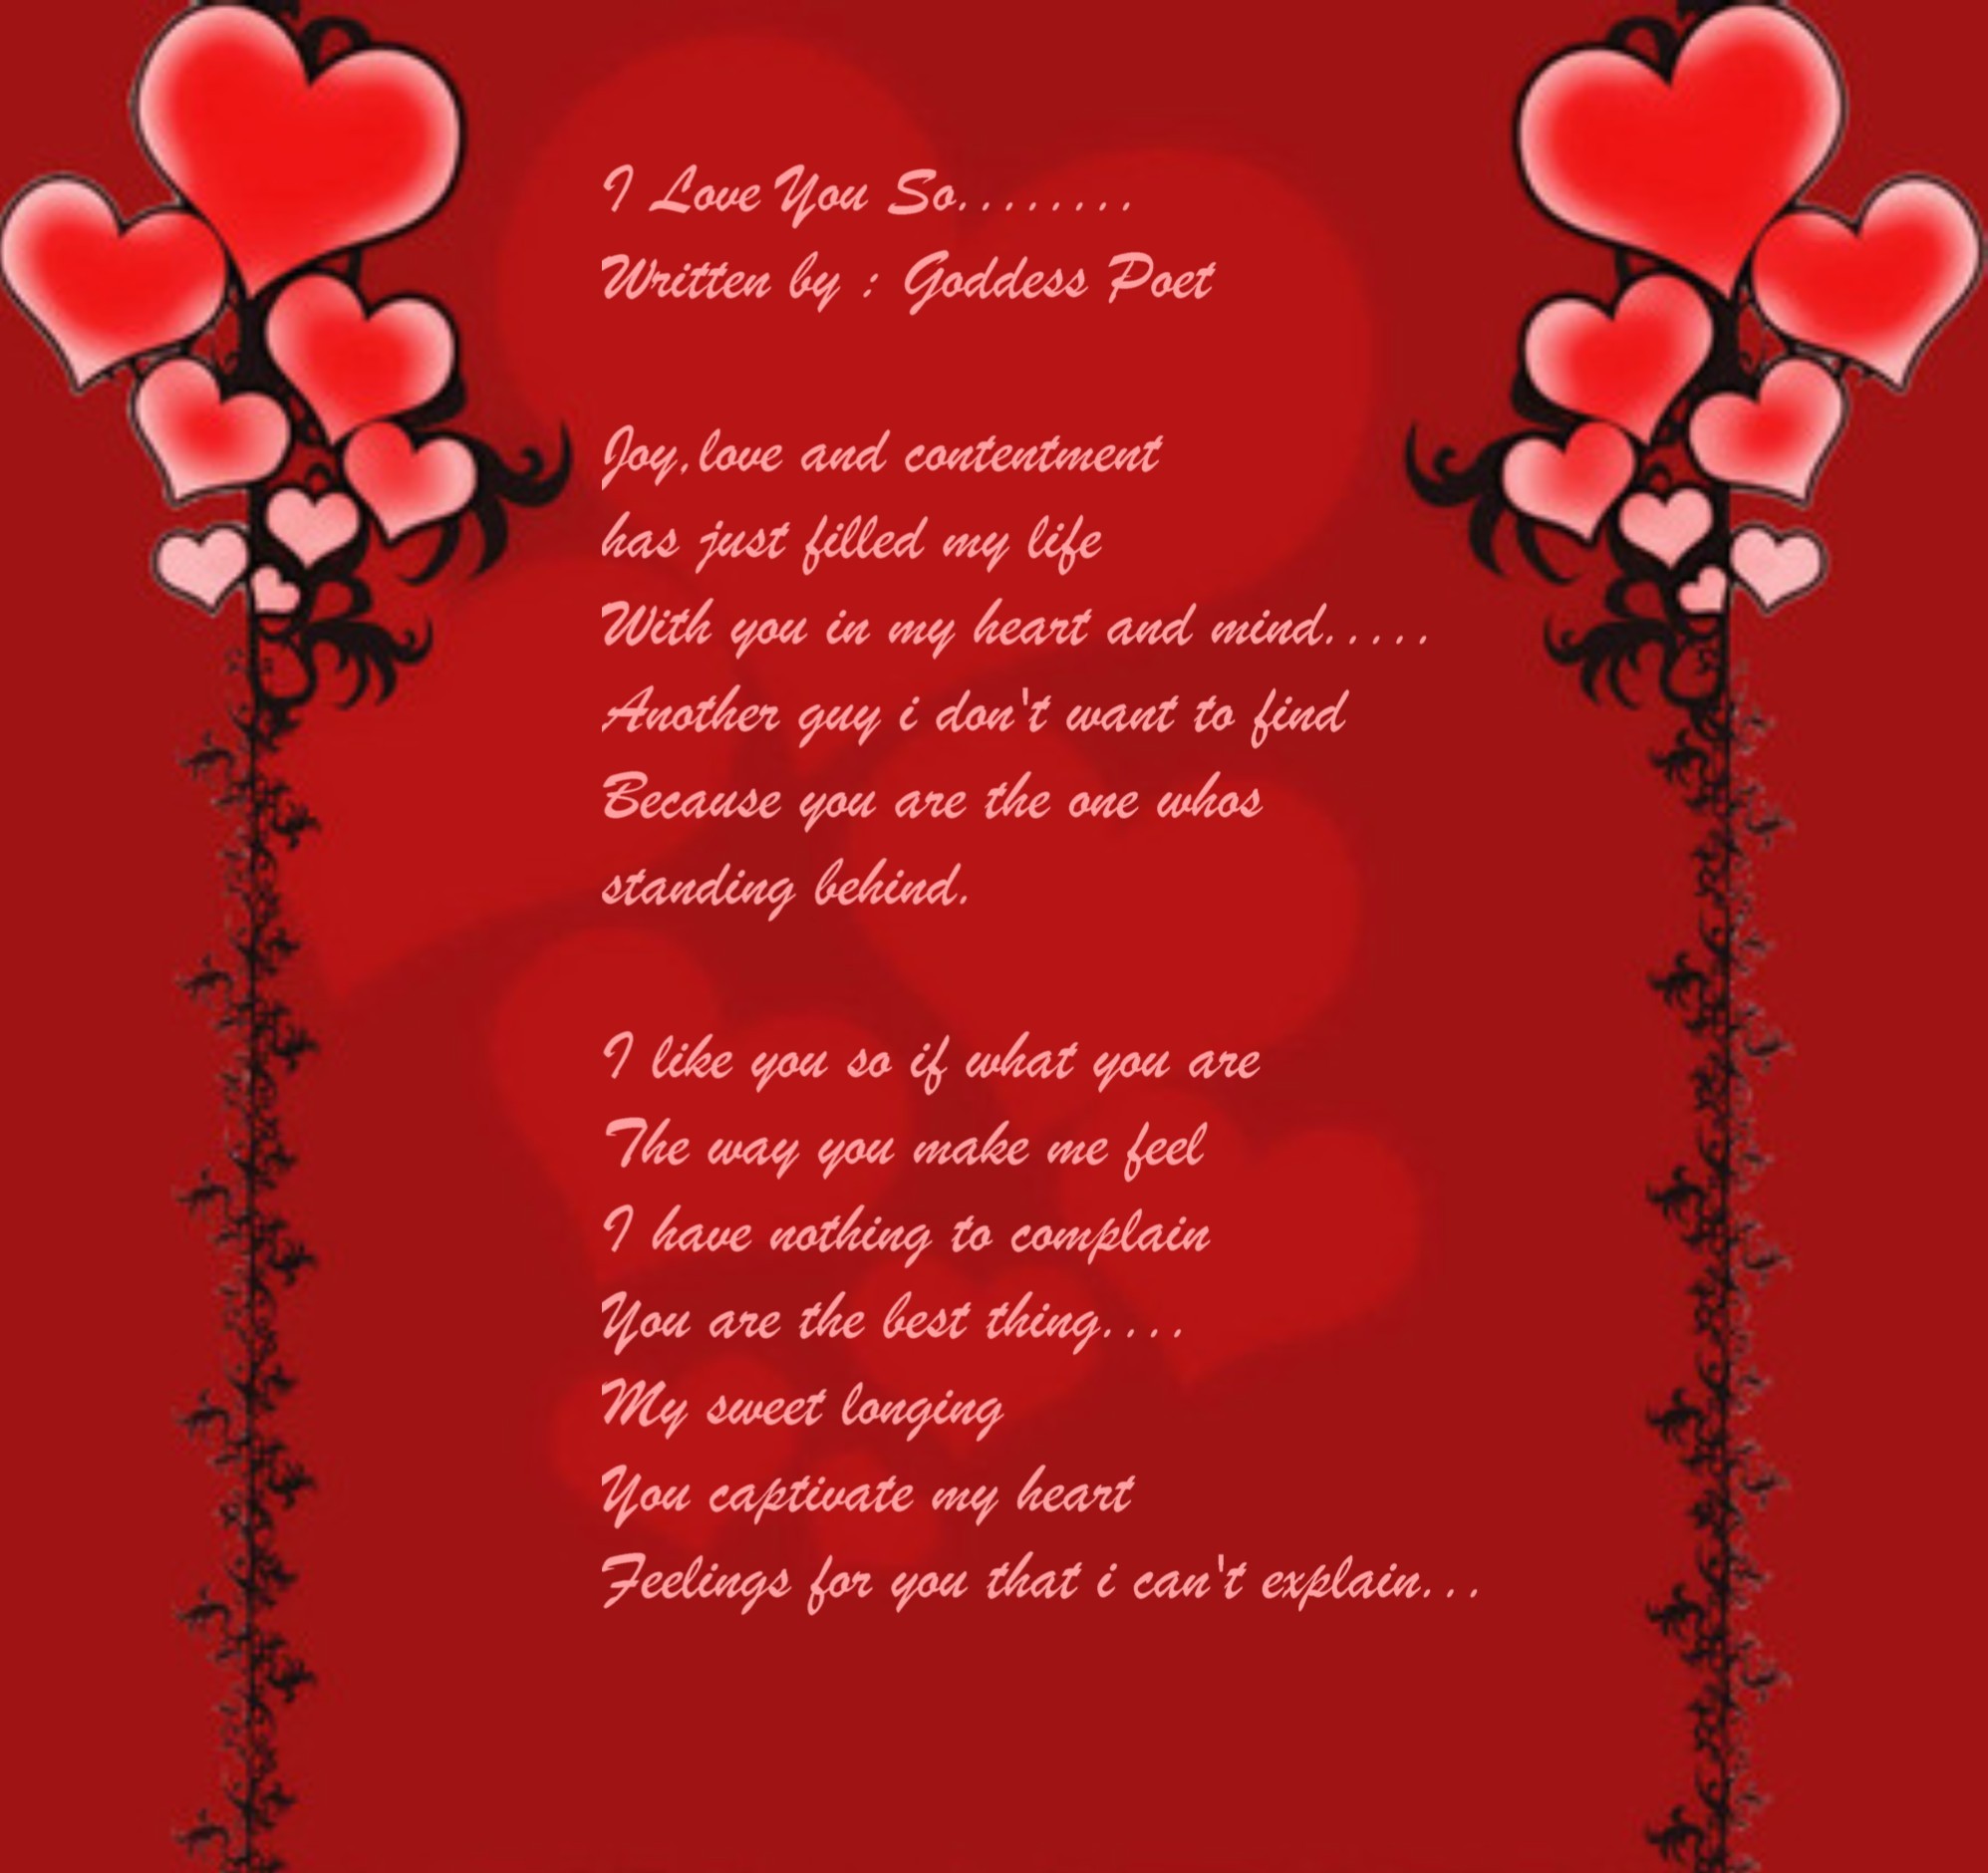 Love Poem Inspirational Quotes